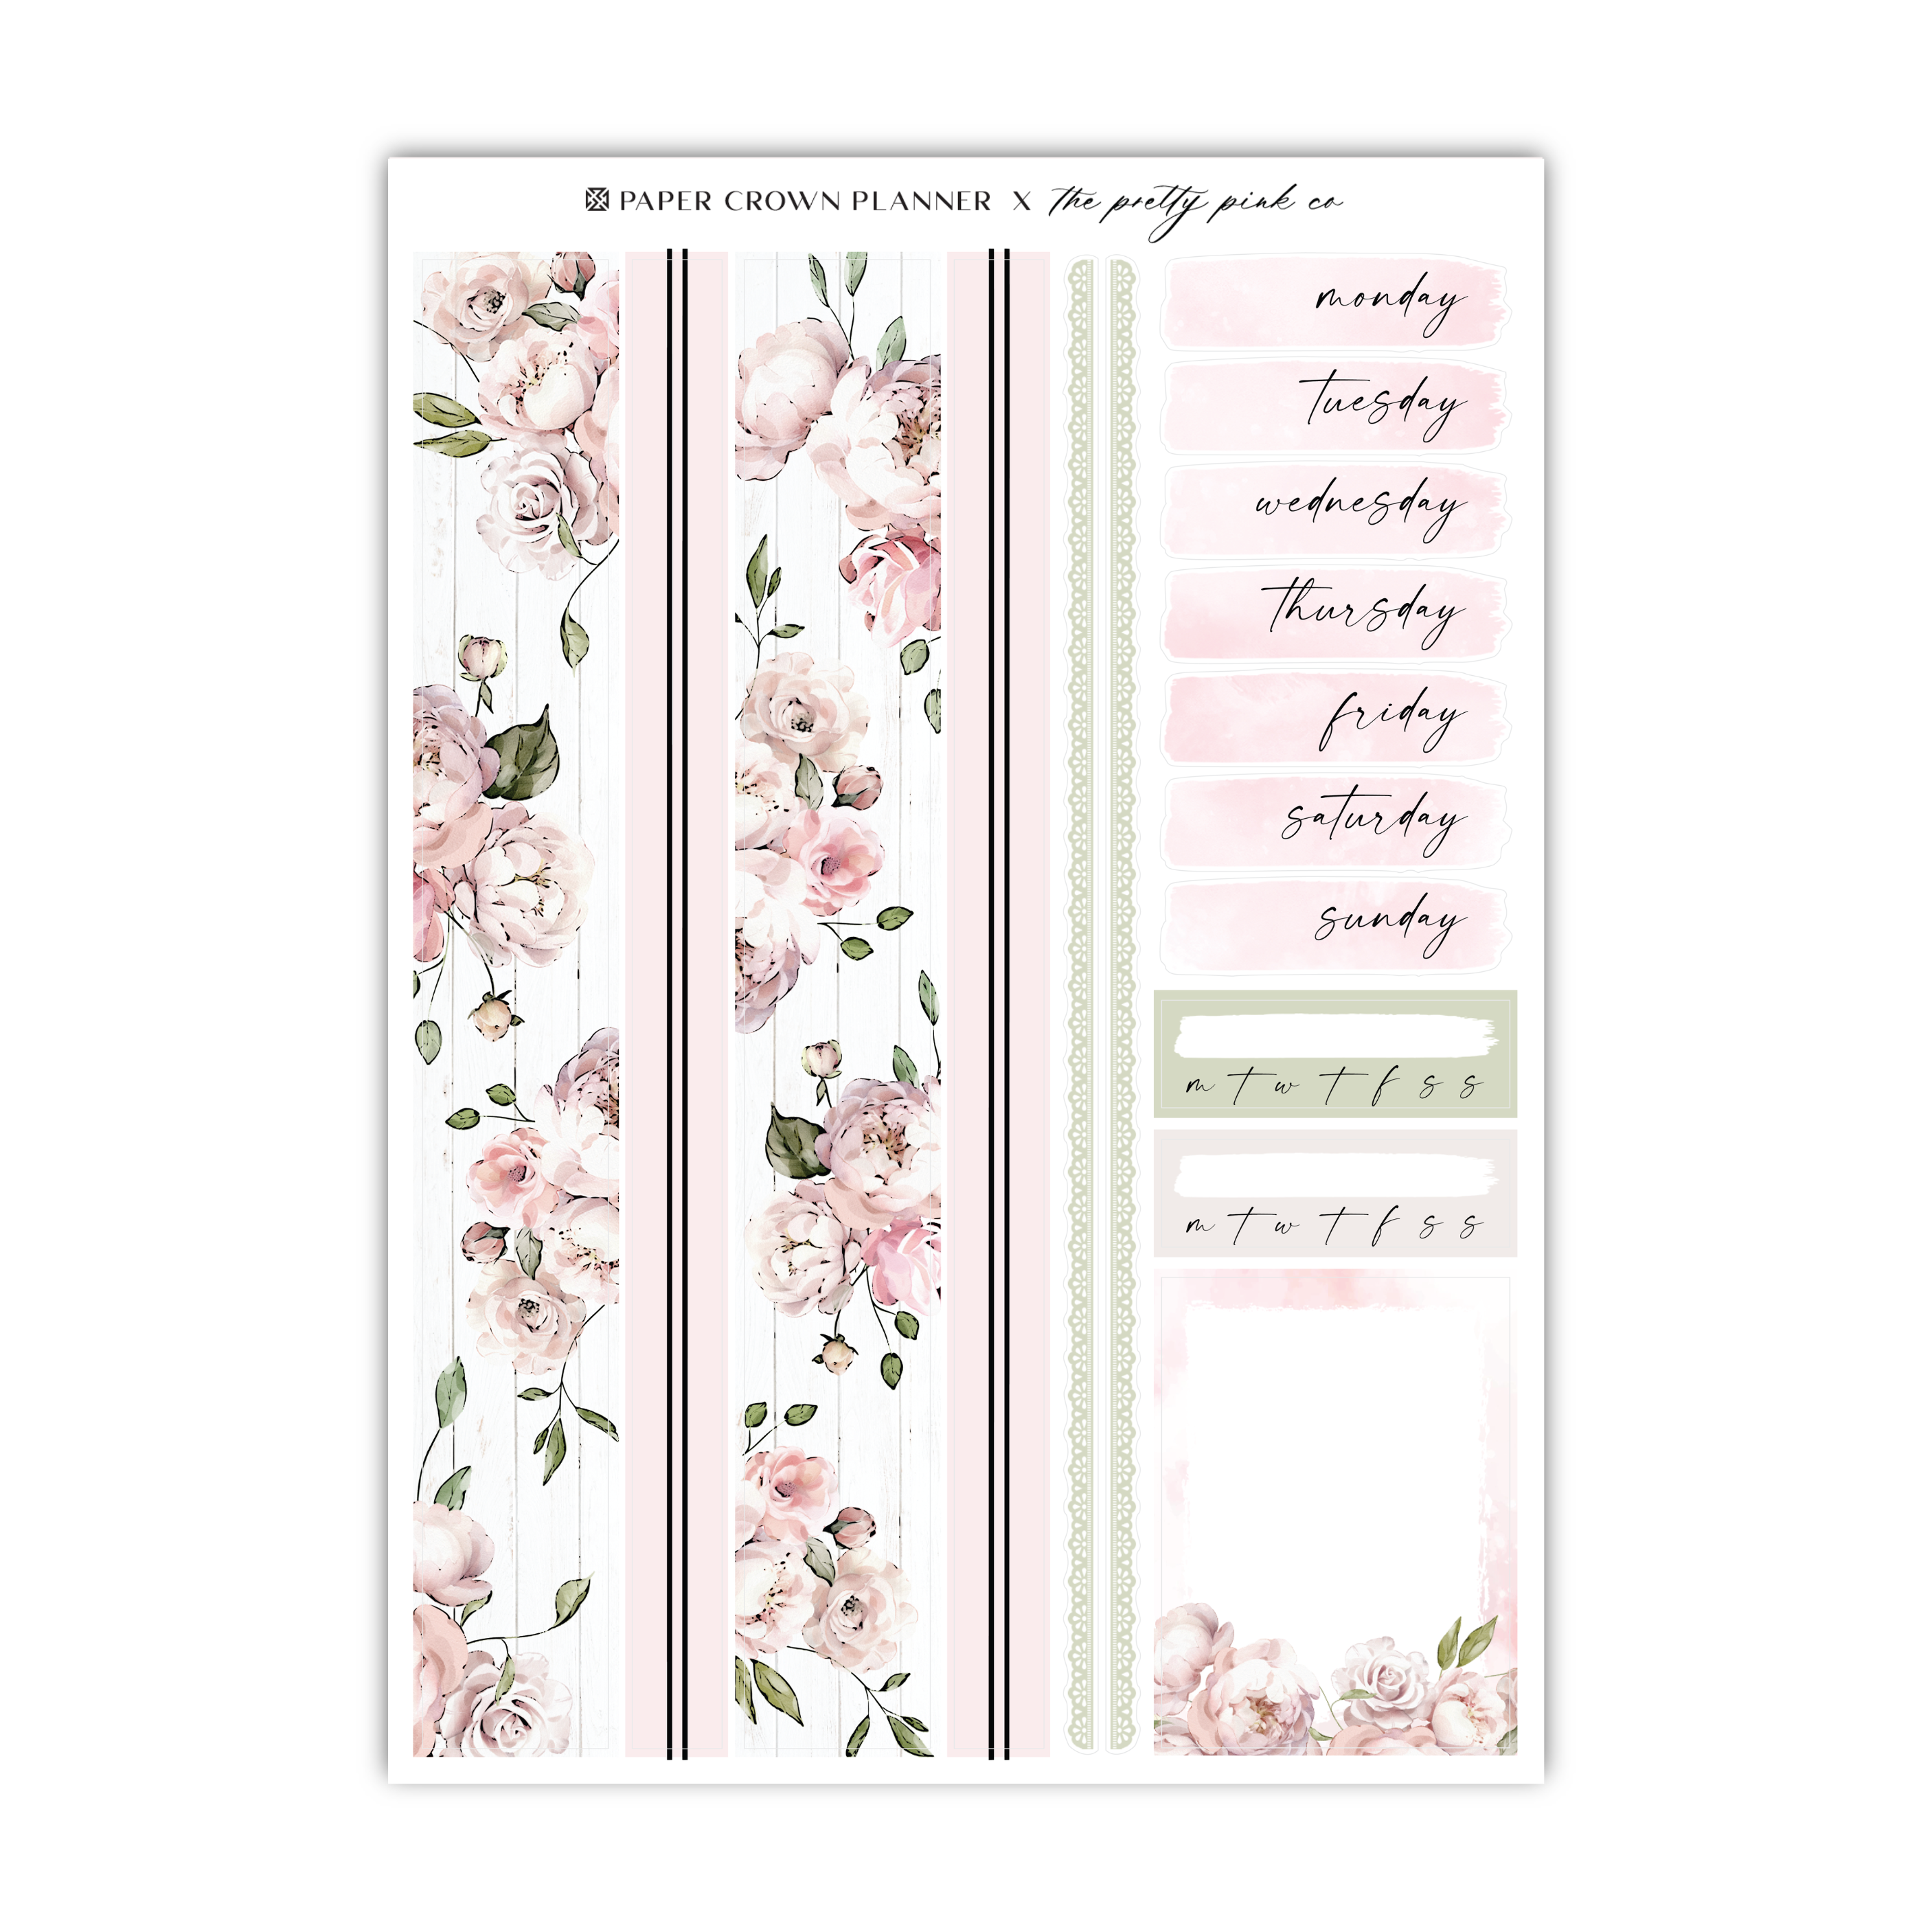 a pink and white floral planner sticker